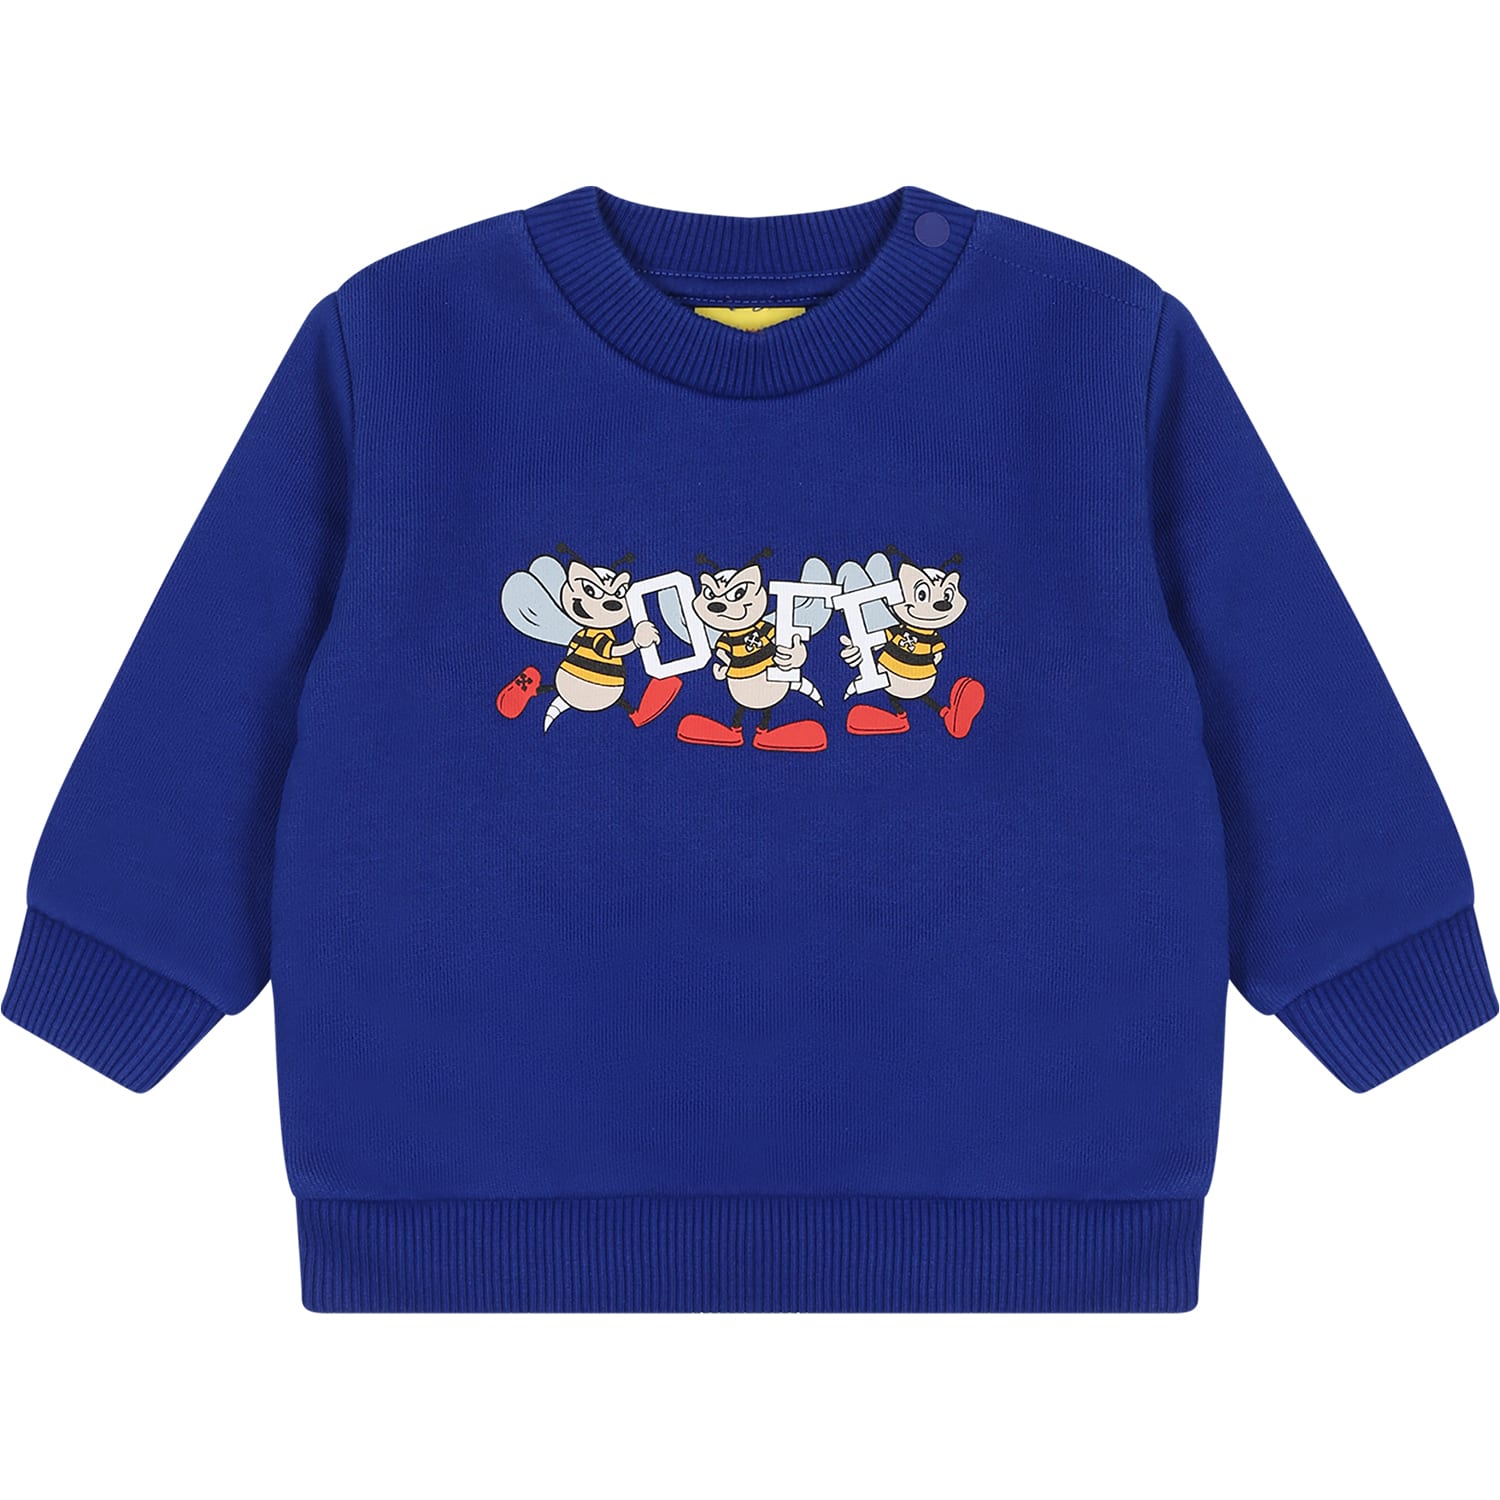 Off-White Blue Sweatshirt For Baby Boy With Mascot Logo Print